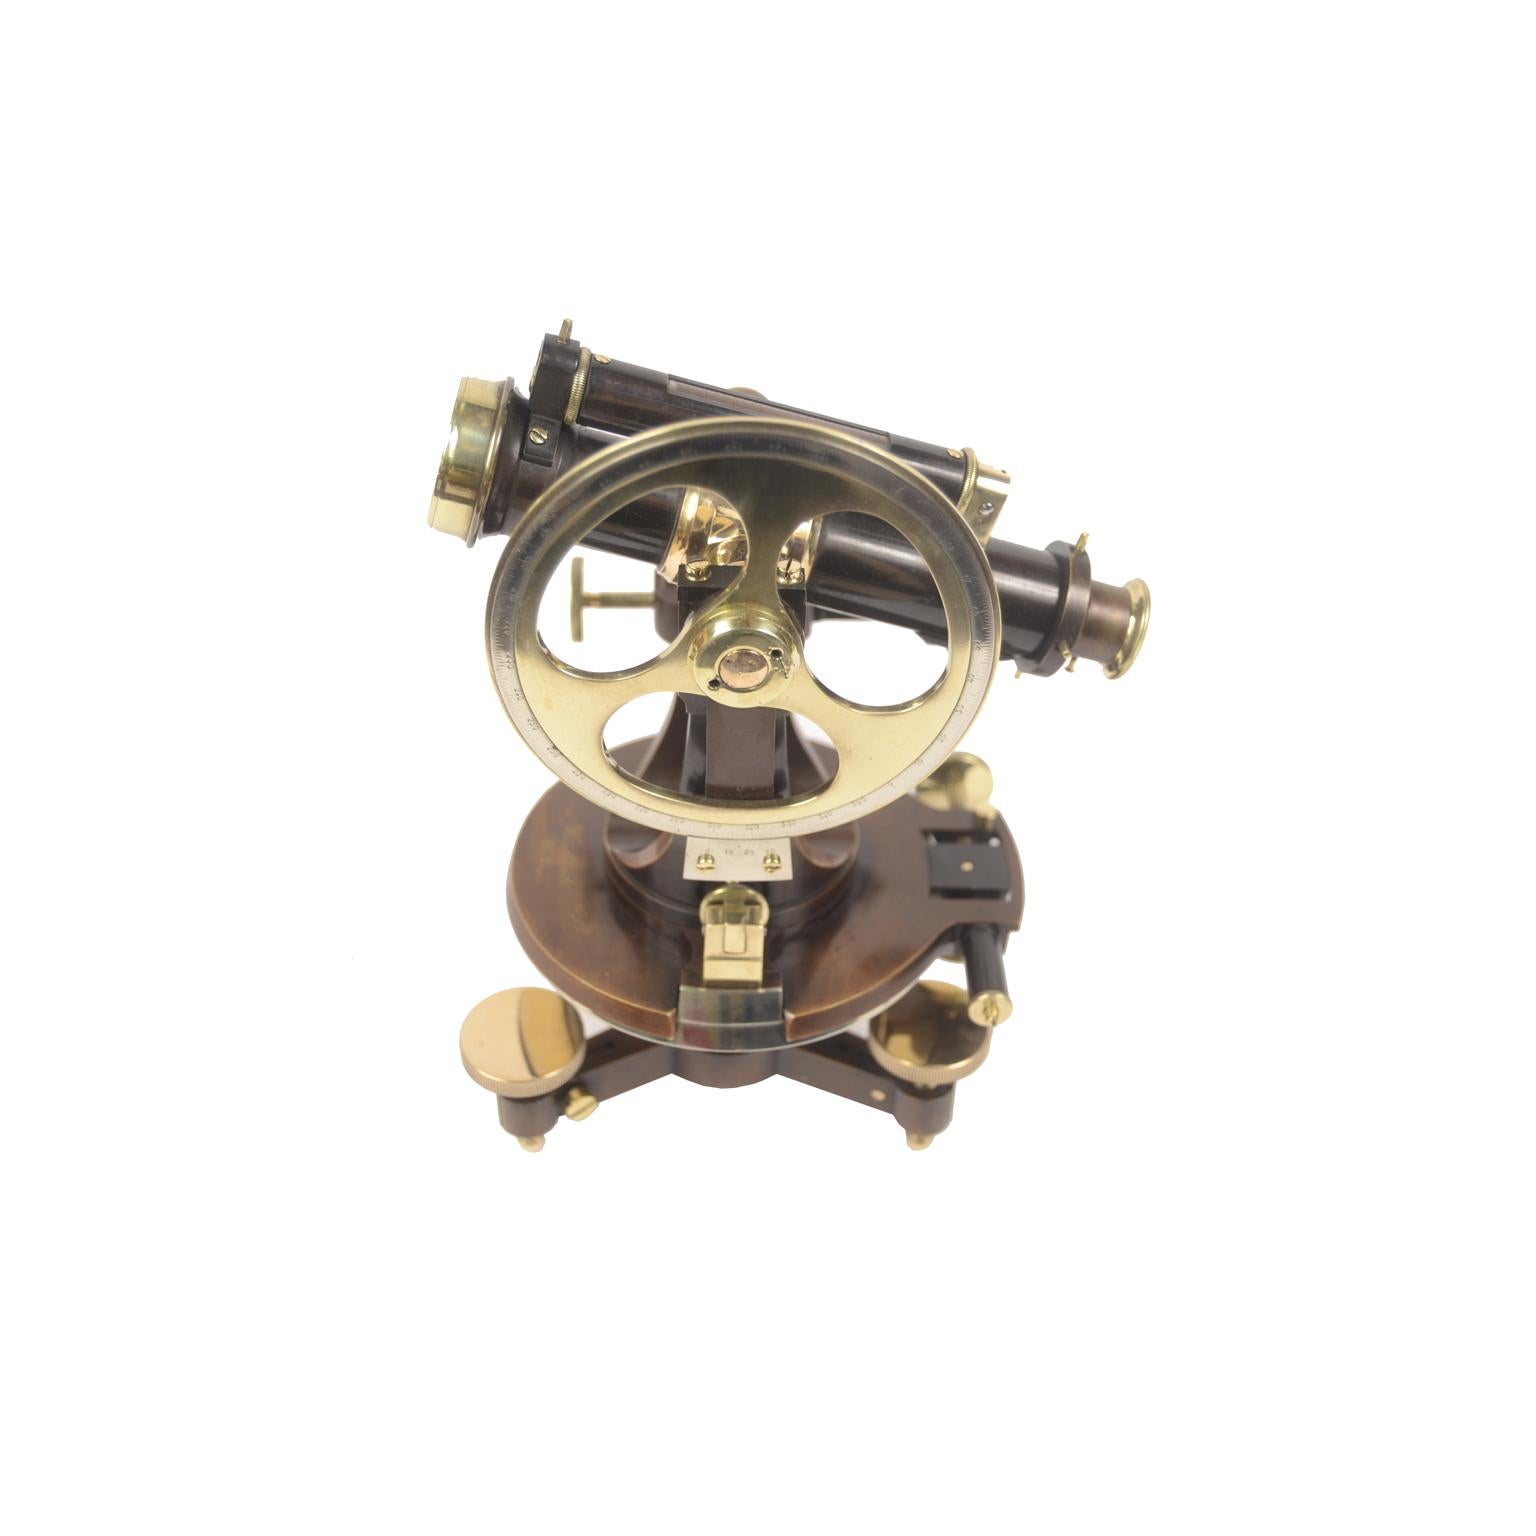 Small and rare tacheometer of burnished brass signed C. Merli Milano, made in the second half of the 19th century.
It is a scientific instrument used in terrestrial observations to measure horizontal and vertical angles. The instrument consists of a